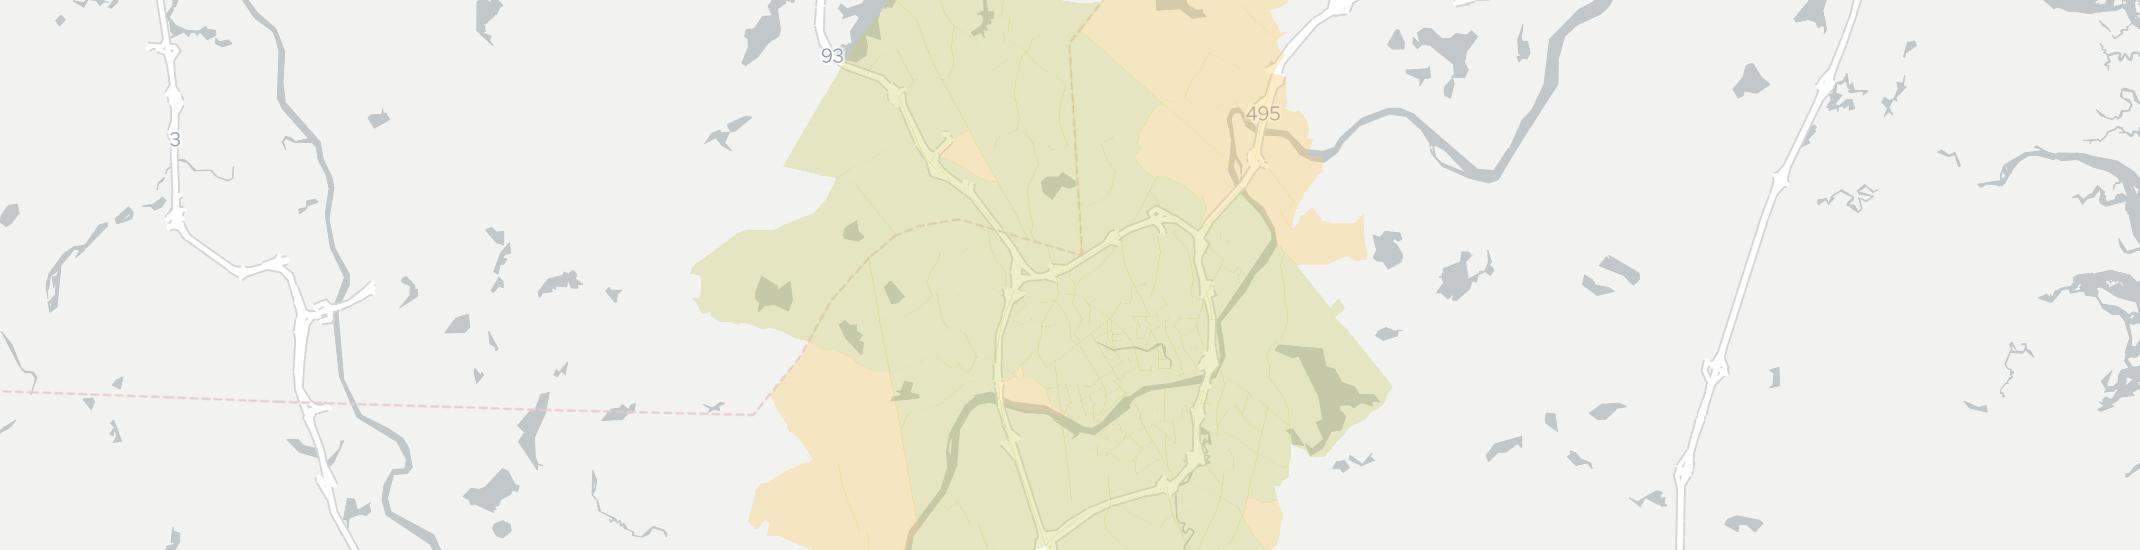 Methuen Internet Competition Map. Click for interactive map.